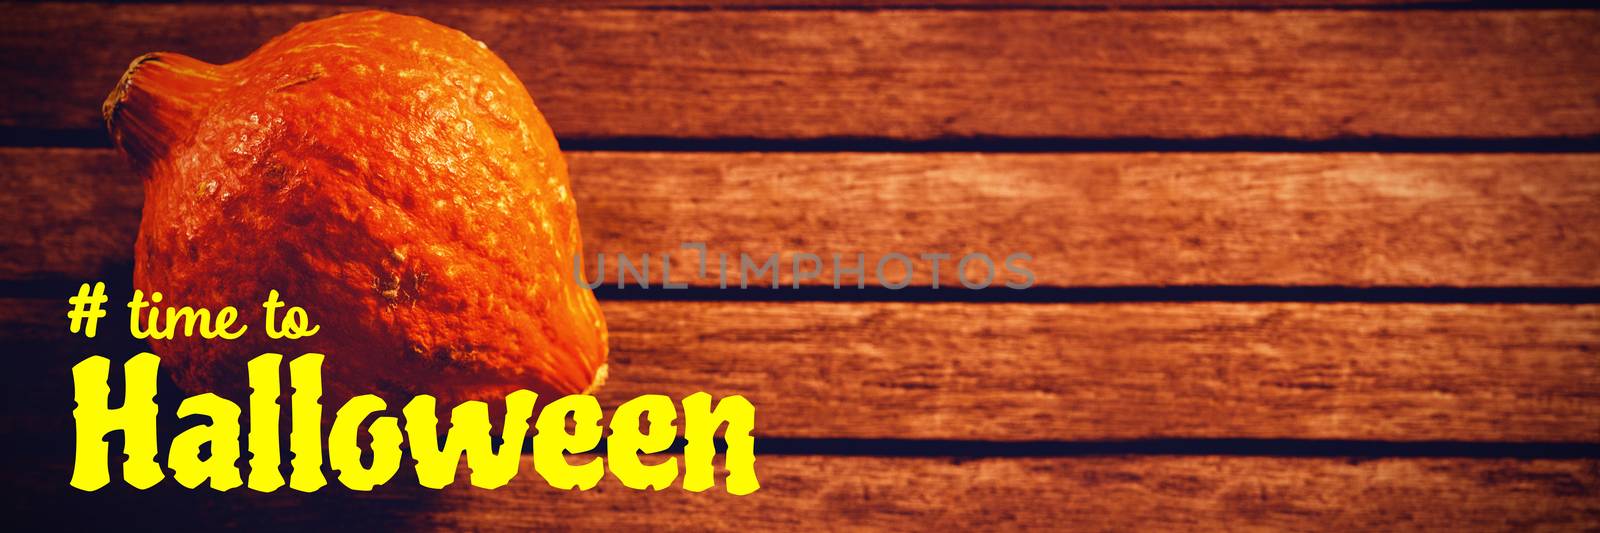 Digital image of time to Halloween text against squash on wooden table during halloween